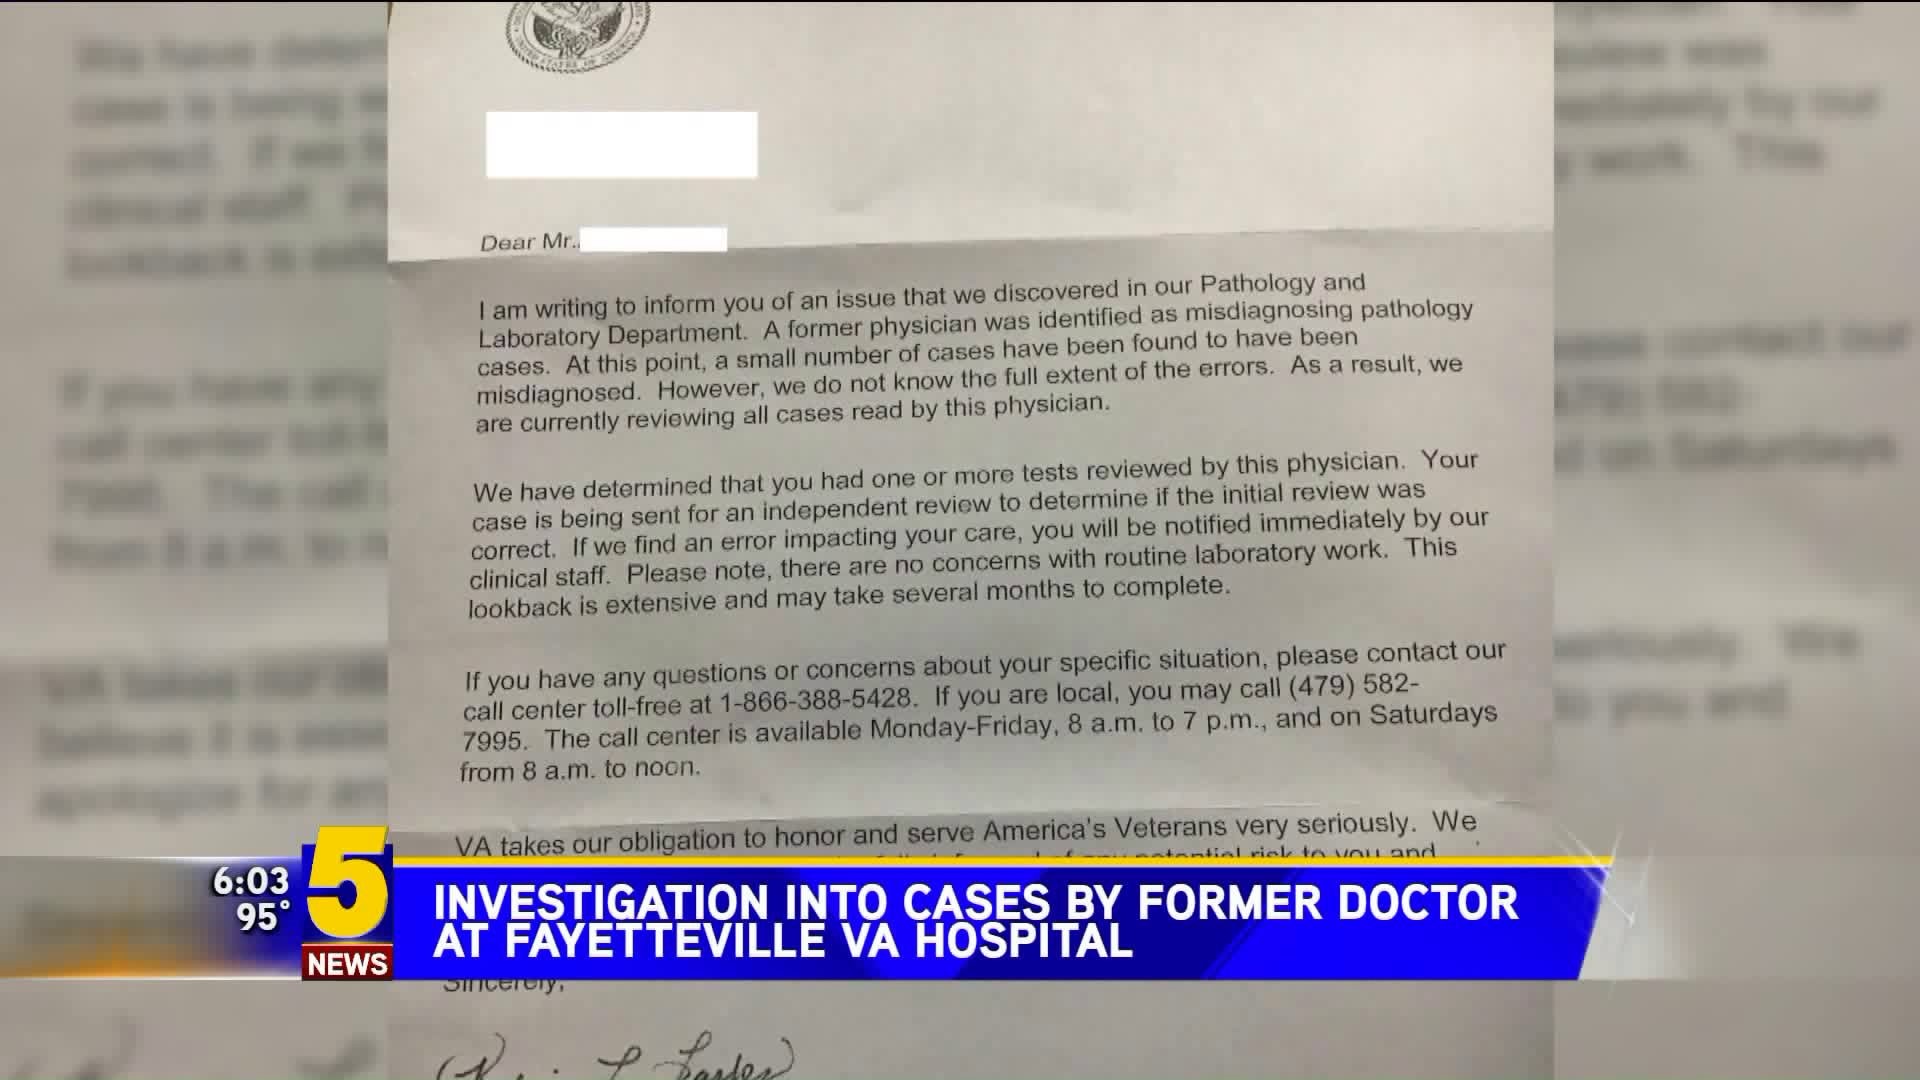 Investigation Into Cases By Former Fayetteville VA Doctor